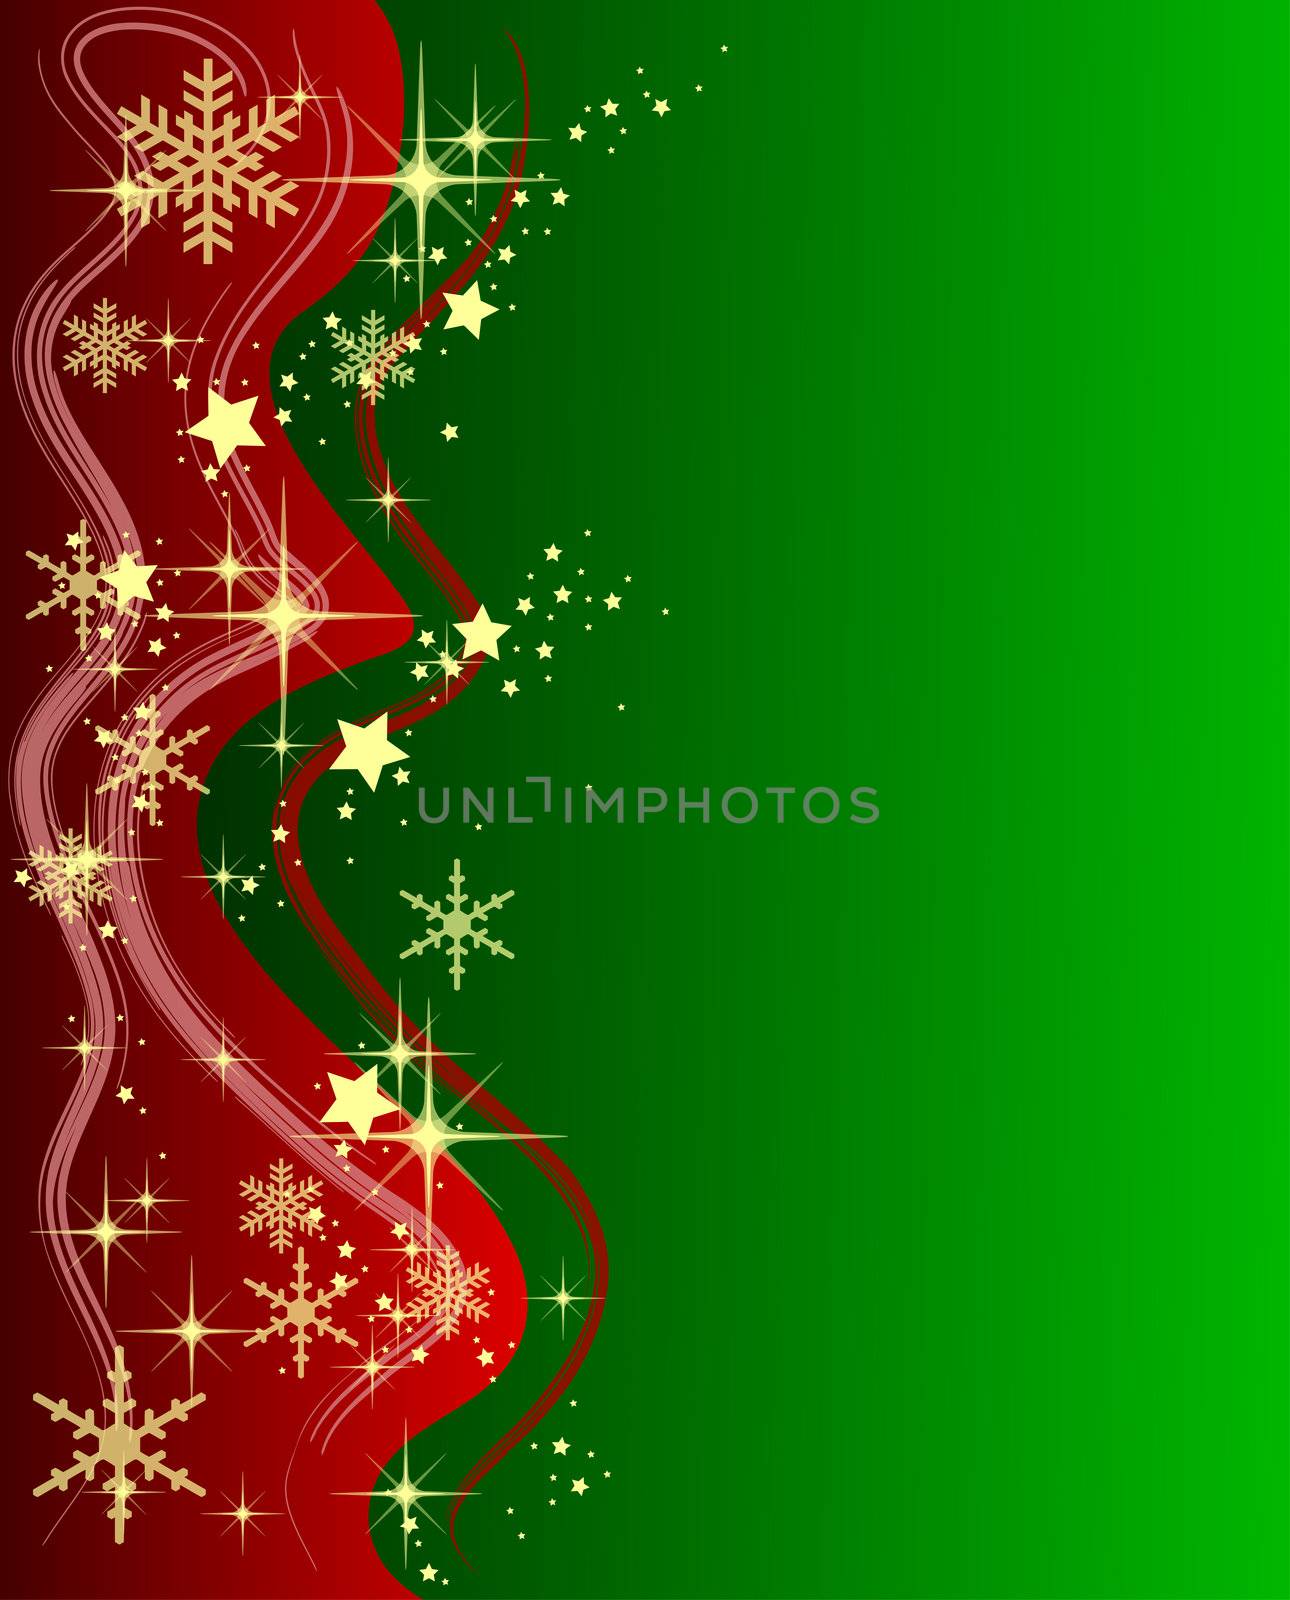 Illustration of a green Christmas Background with Stars by peromarketing